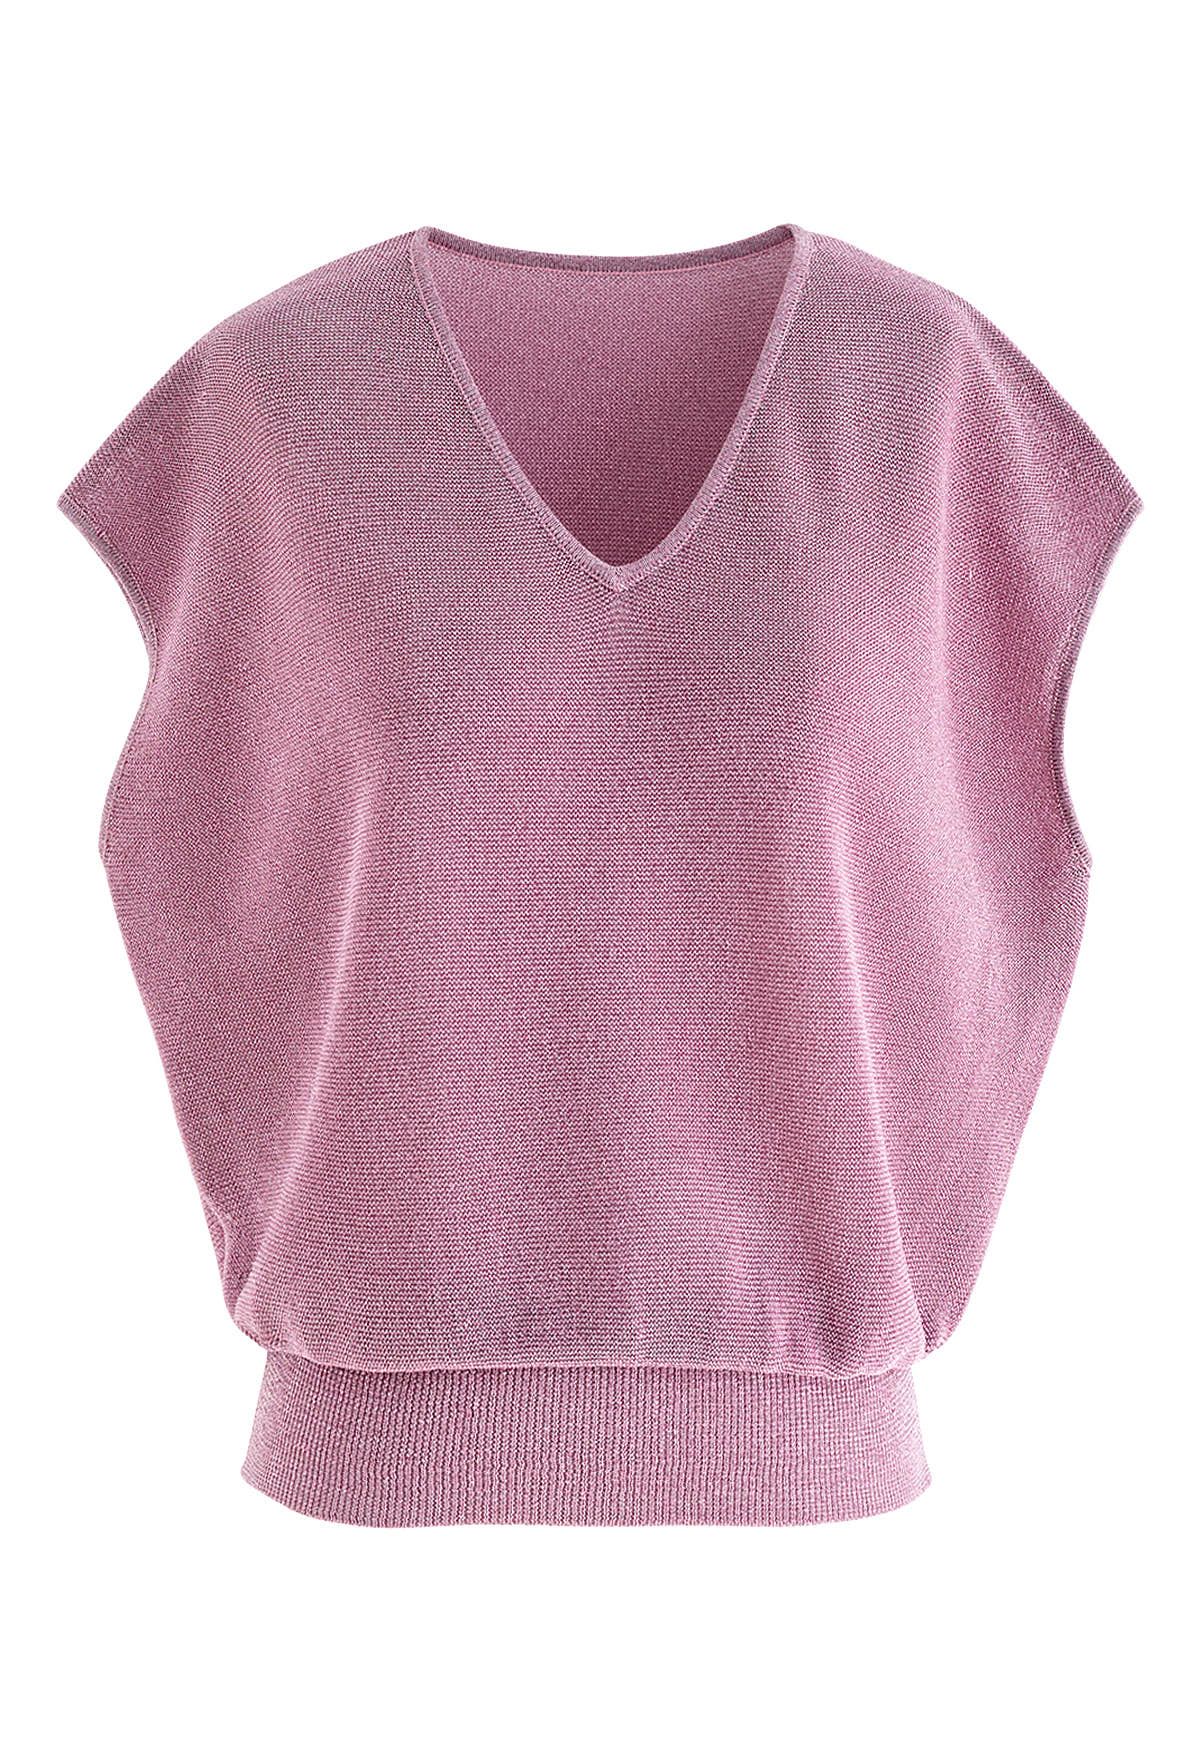 Glimmer Knit V-Neck Sleeveless Top in Lilac